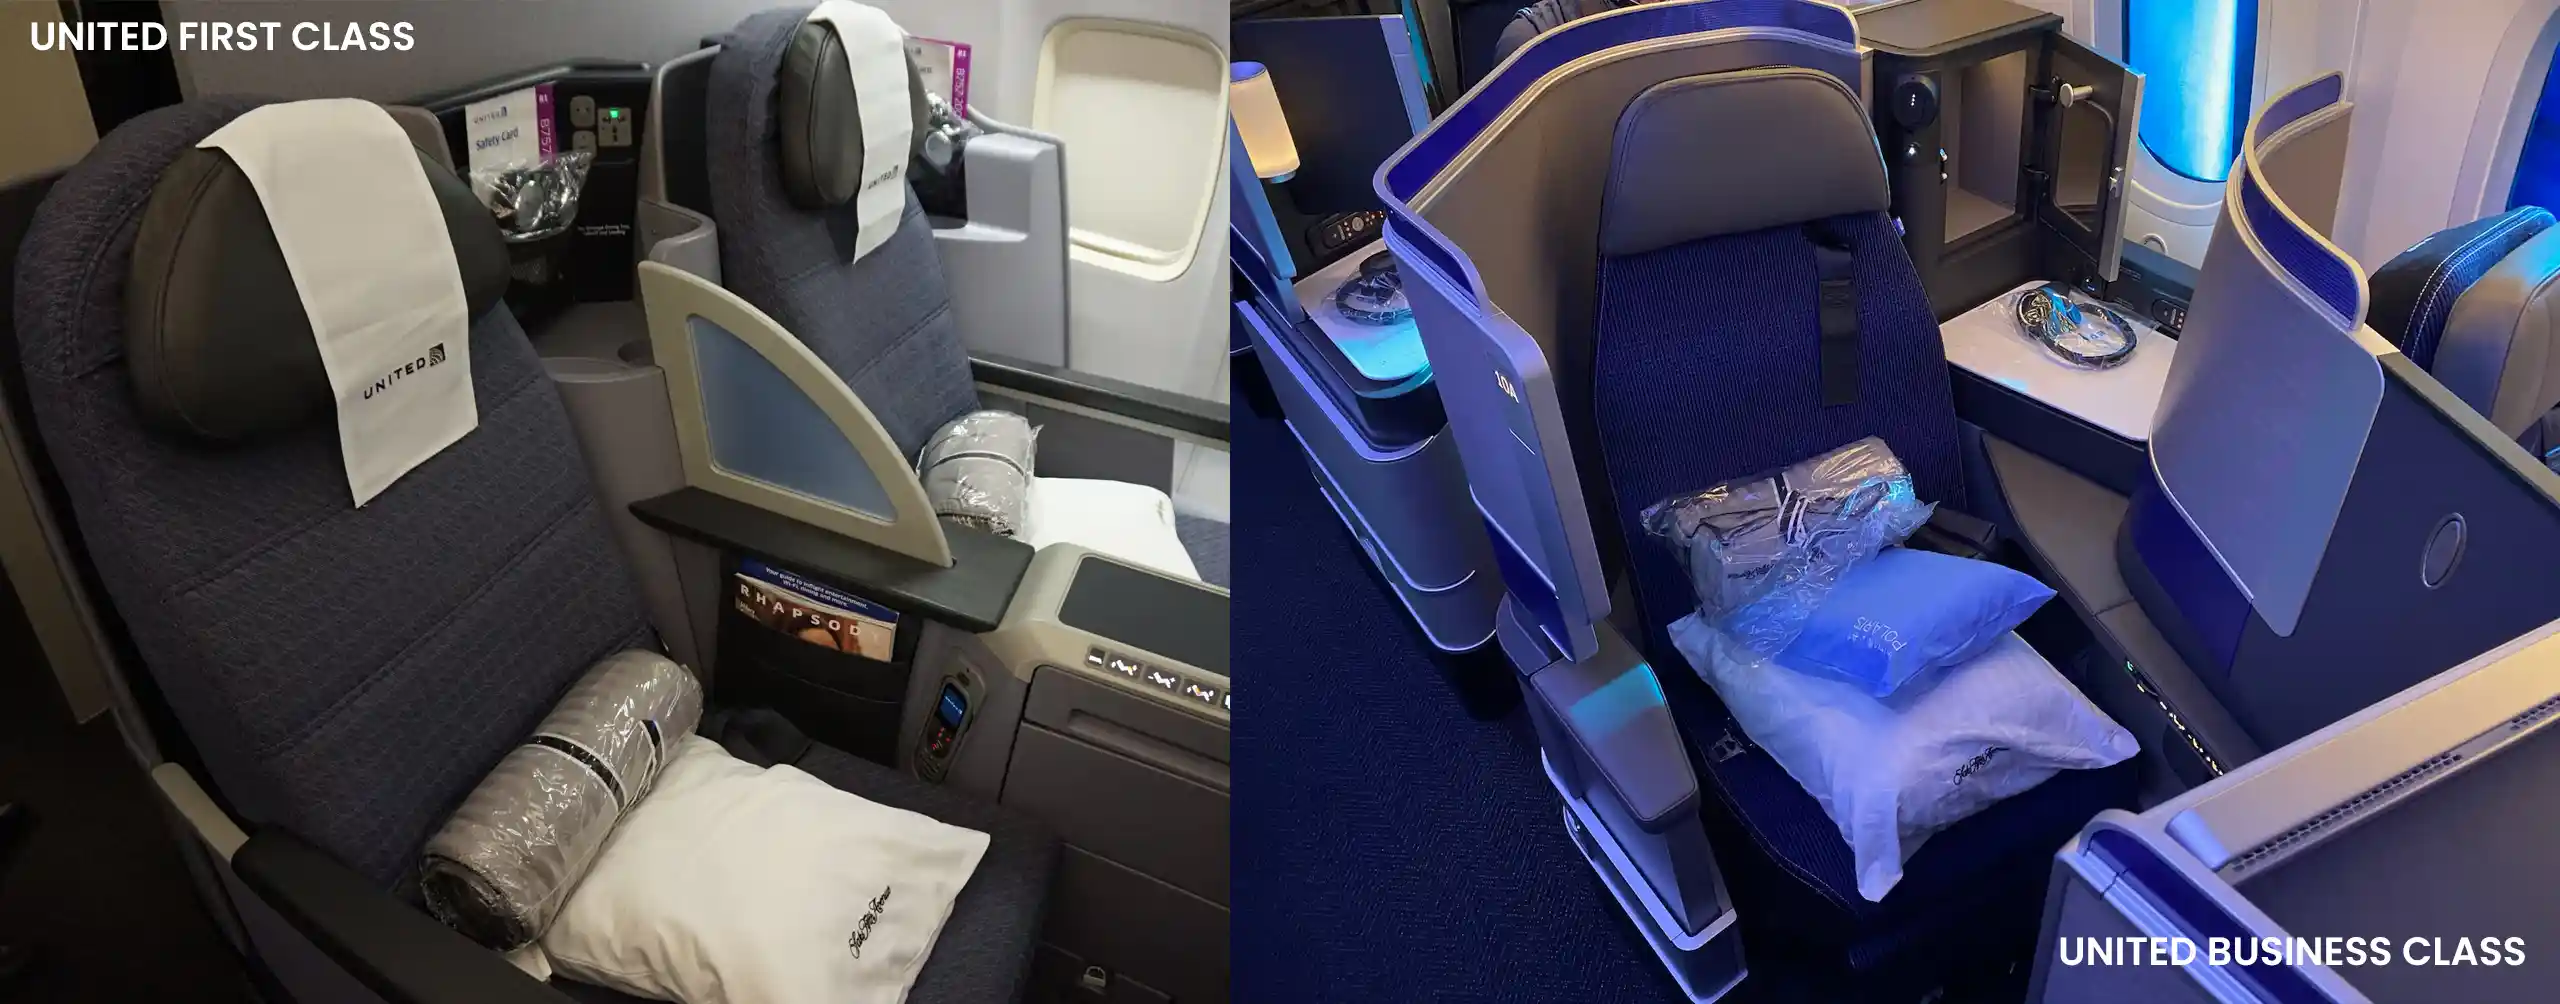 United Airlines Business Class V/s First Class